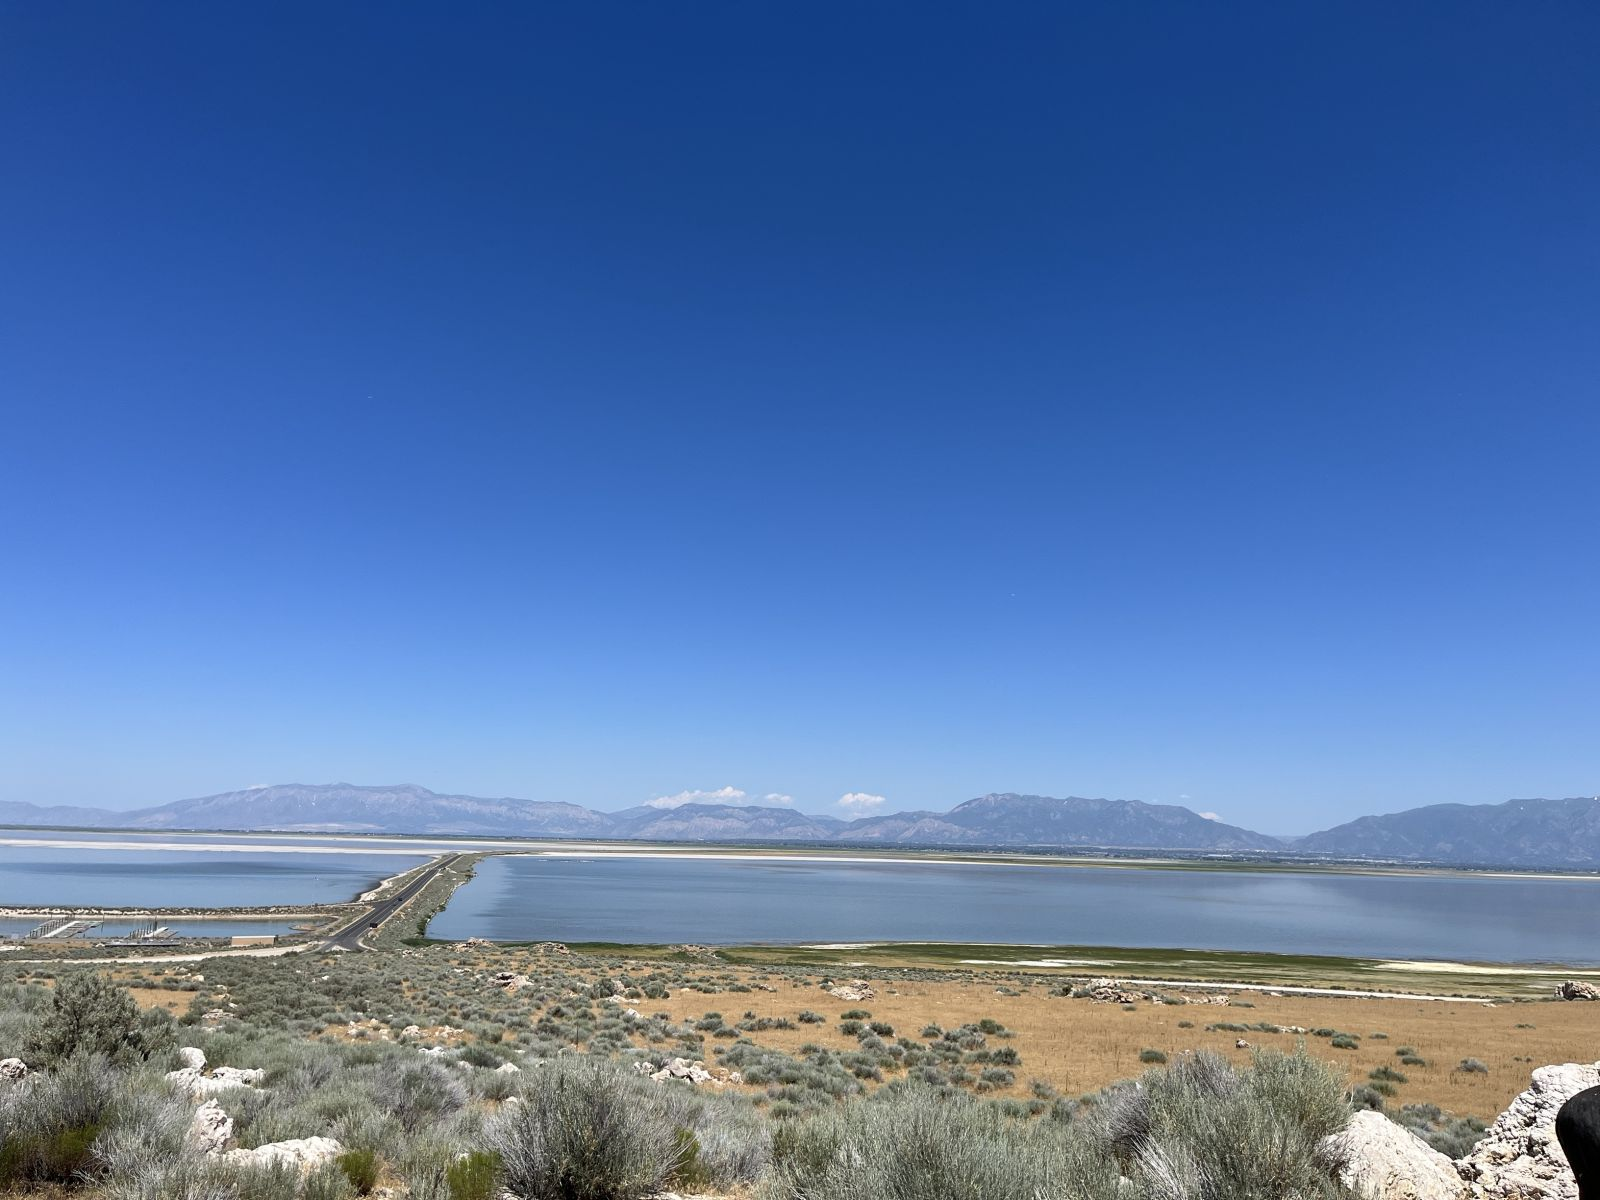 A healthy Great Salt Lake could be bad news for mosquitoes